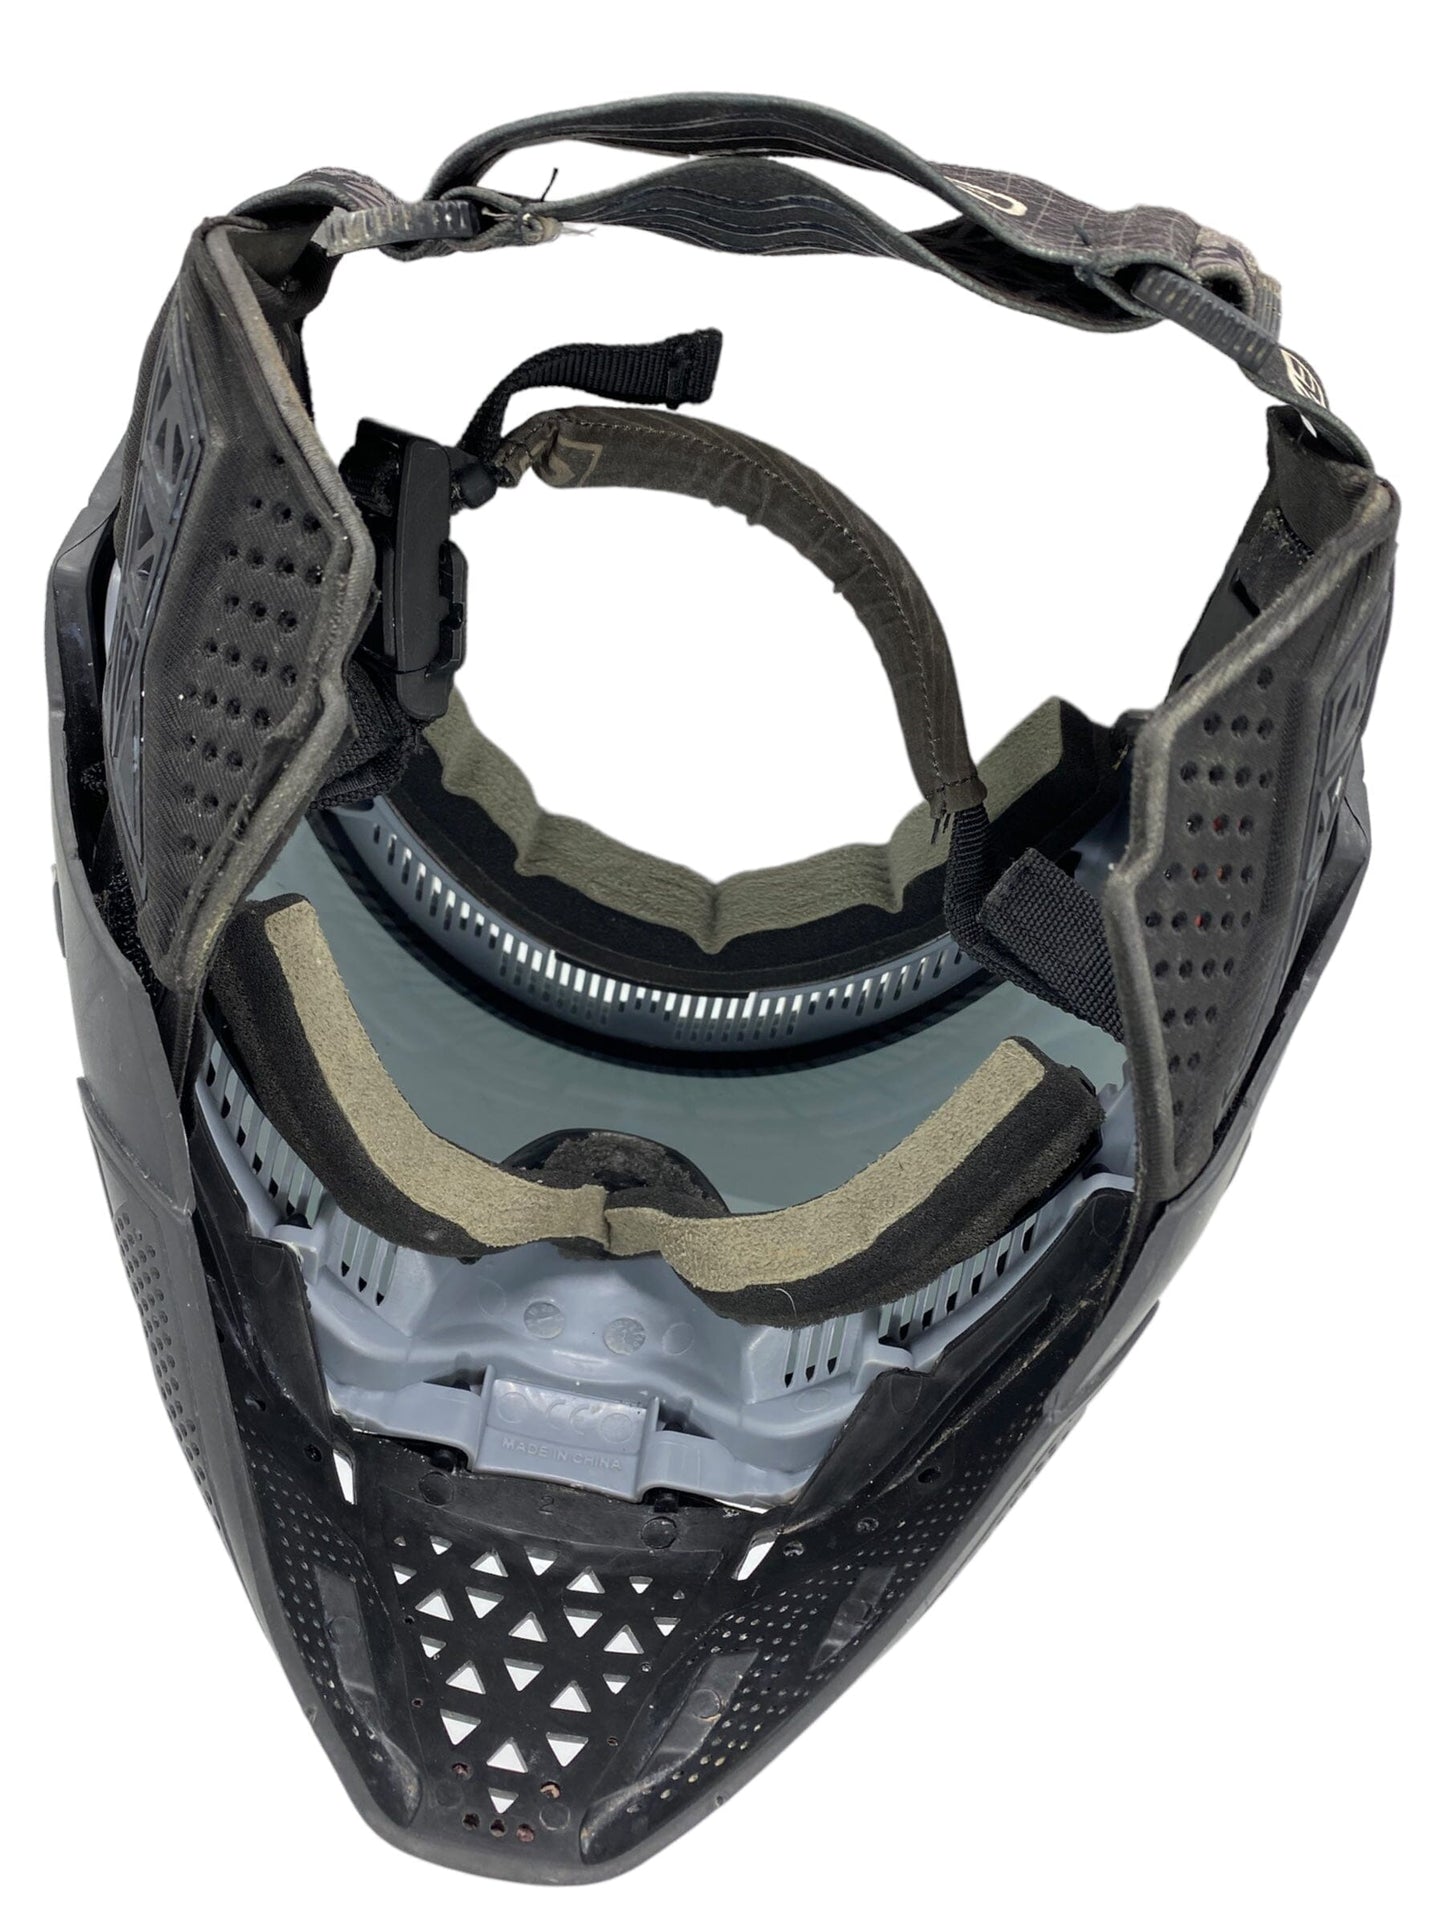 Used Empire Evs Paintball Mask Goggles Paintball Gun from CPXBrosPaintball Buy/Sell/Trade Paintball Markers, New Paintball Guns, Paintball Hoppers, Paintball Masks, and Hormesis Headbands